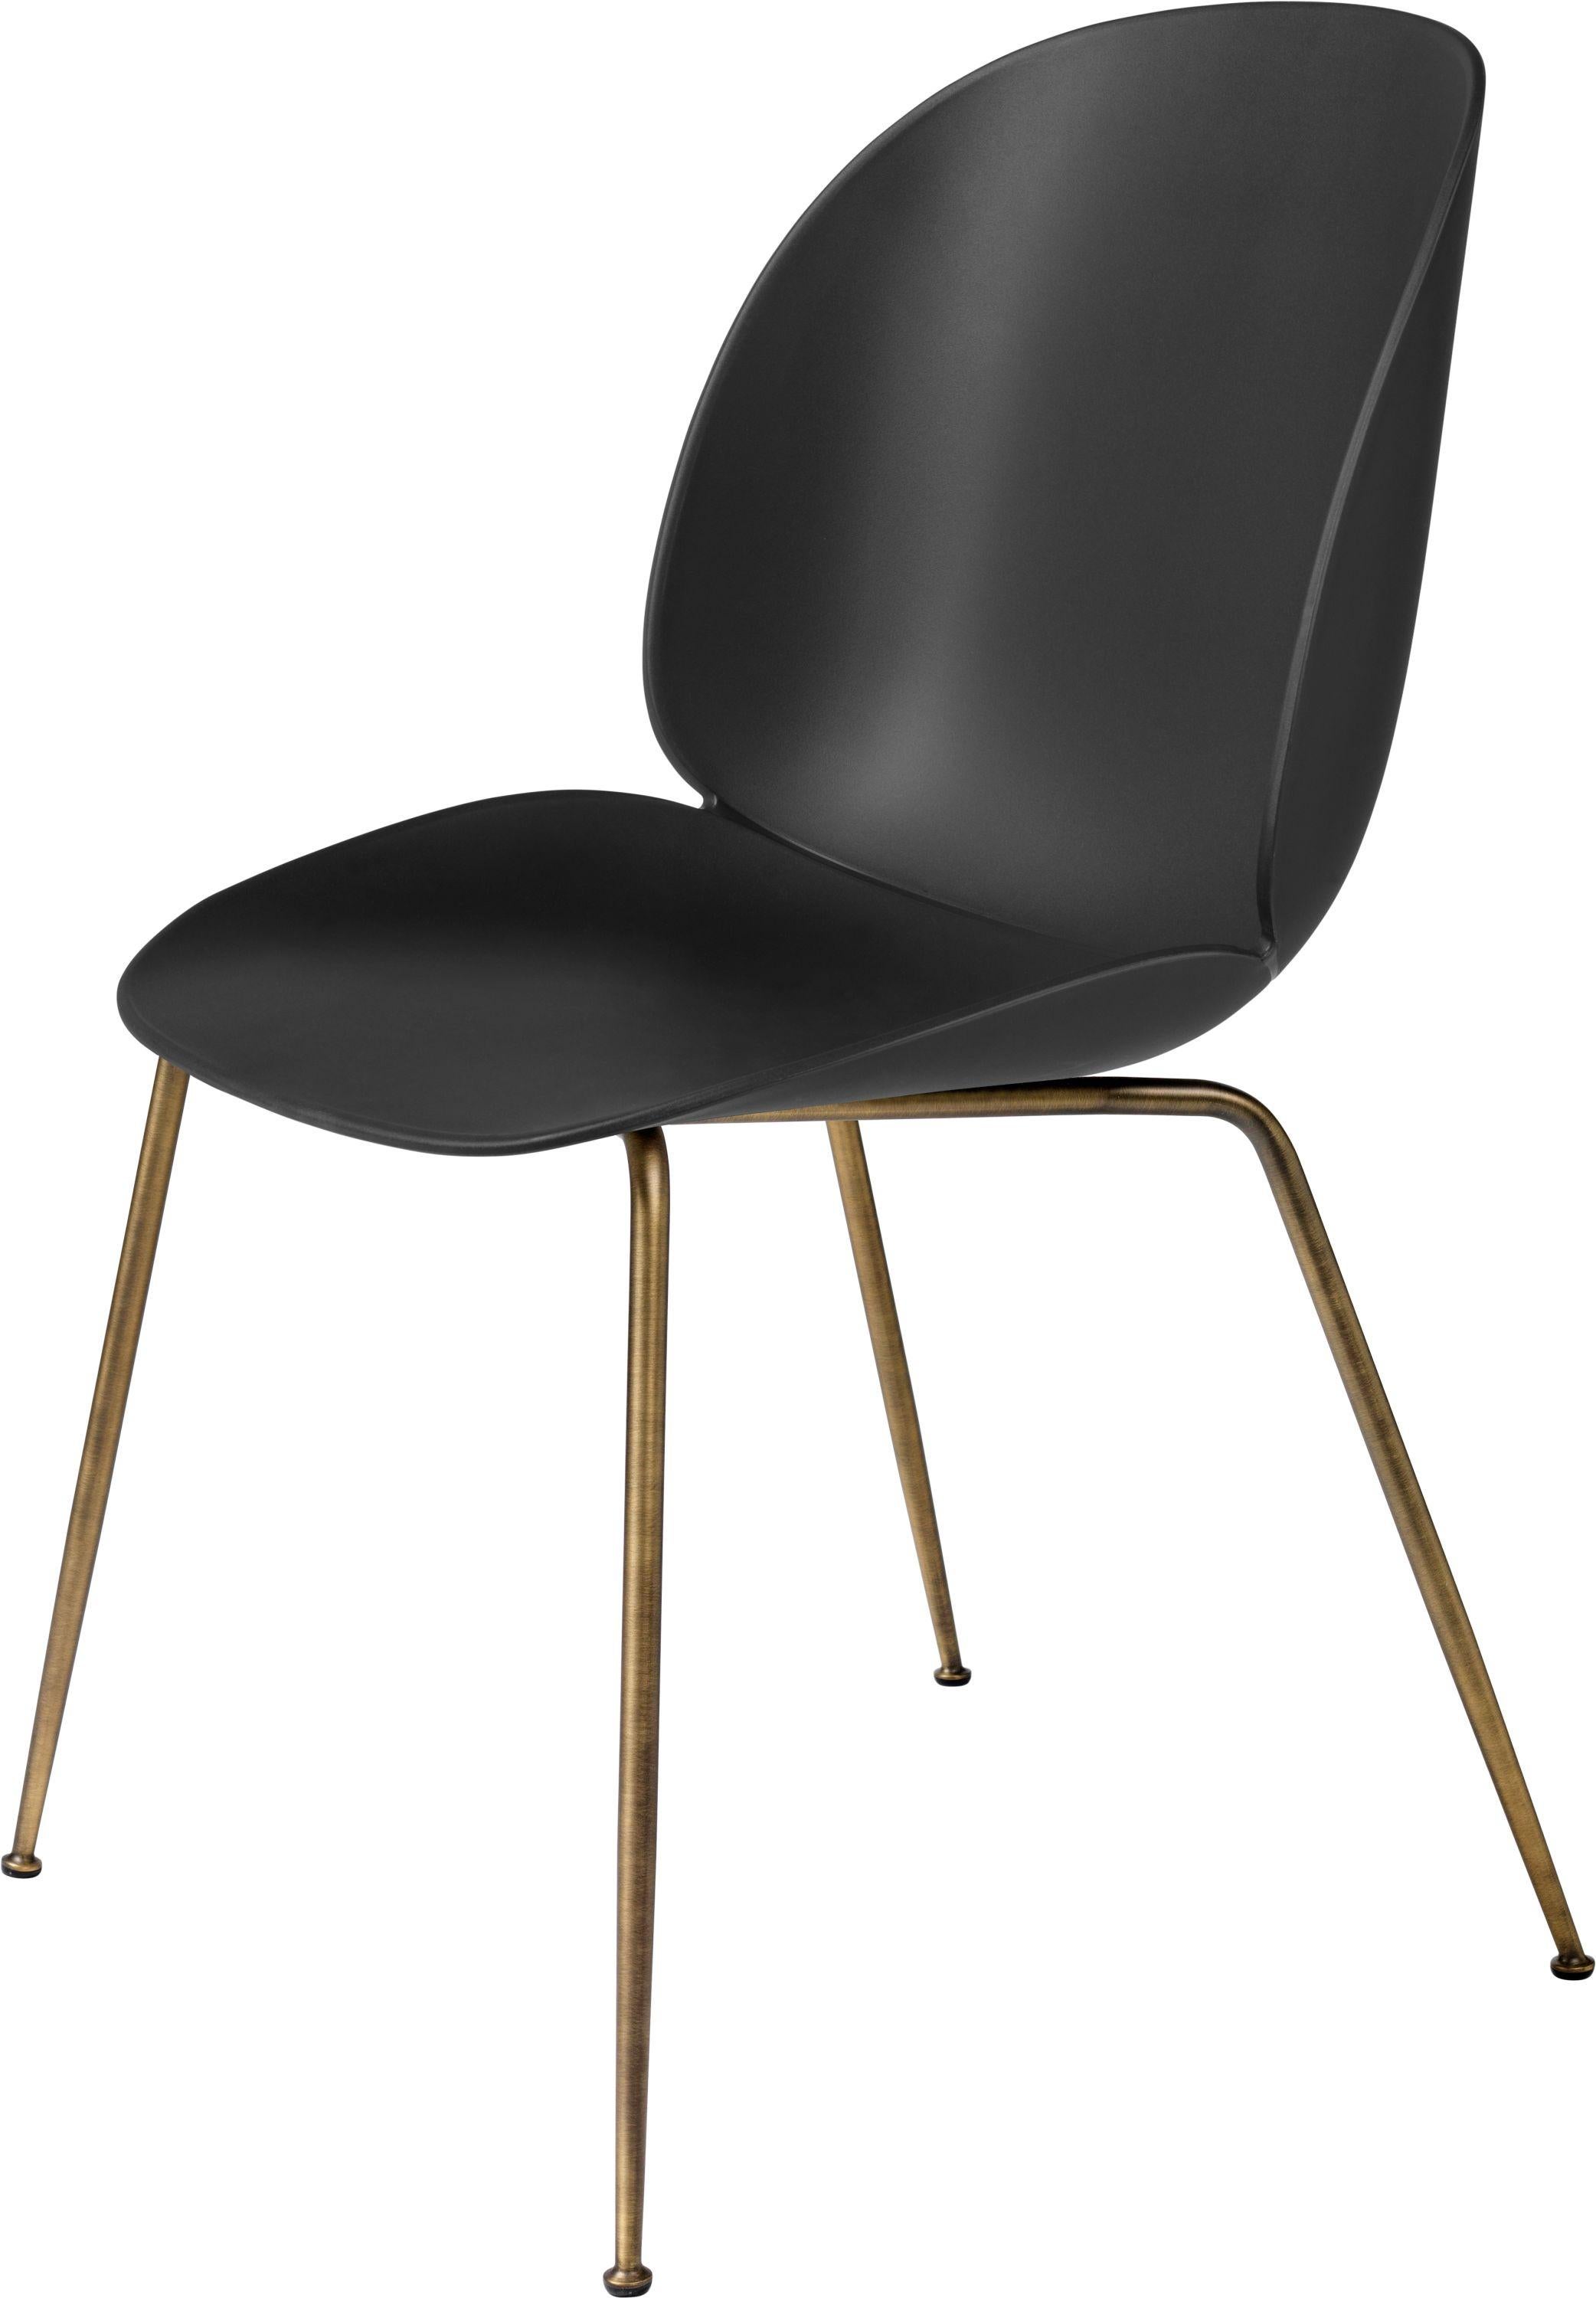 GamFratesi 'Beetle' dining chair with antique conic base. Designed by Danish-Italian design-duo GamFratesi in 2013. The Beetle chair’s durable outer shell is a continuous curved form reminiscent of the strong and graceful contours of the insect that